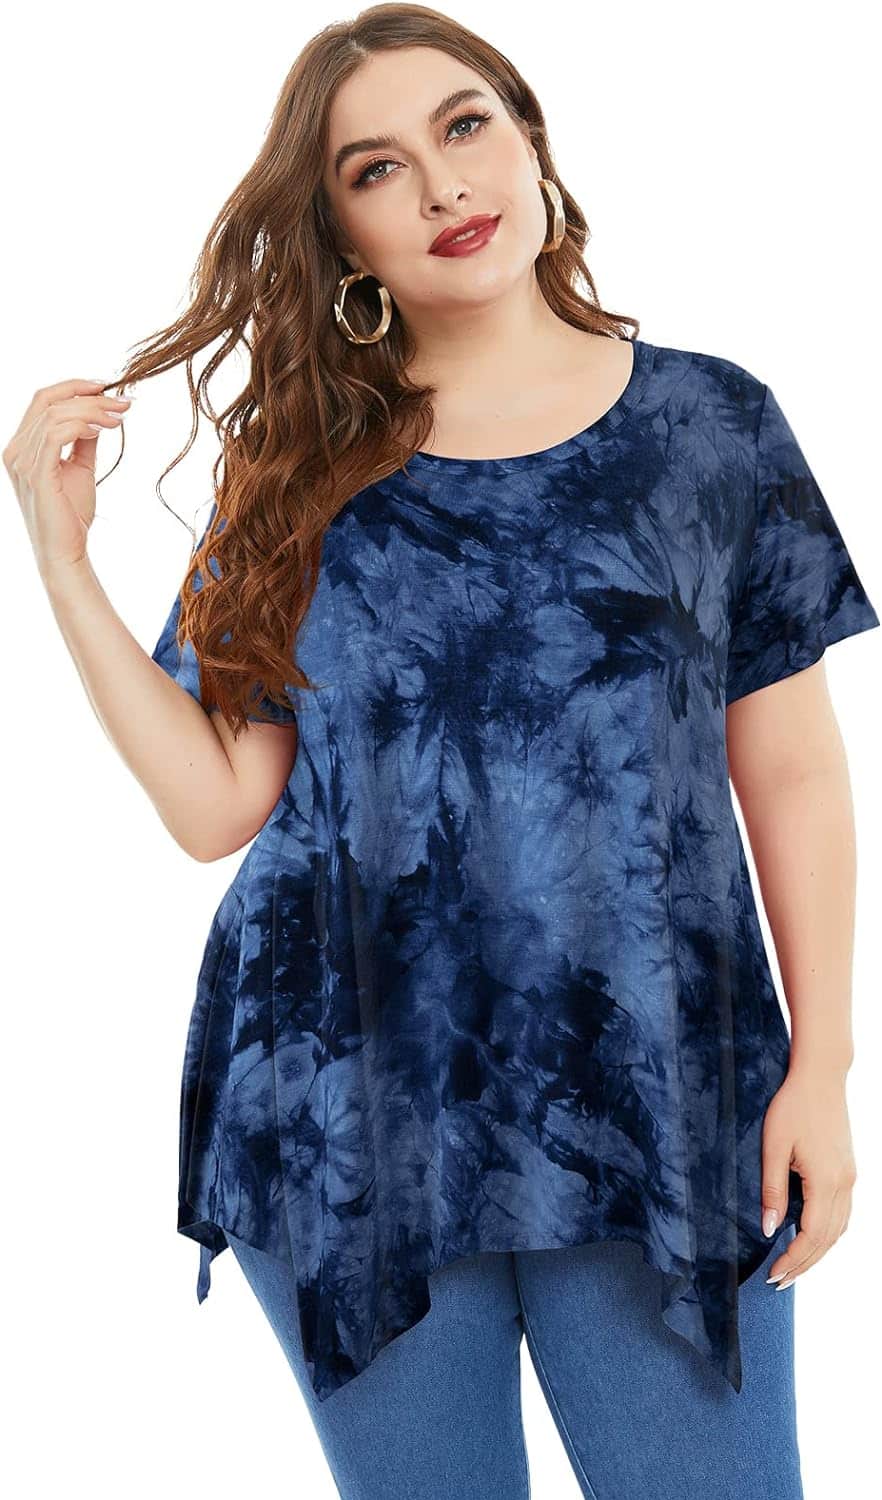 ZENNILO Womens Plus Size Casual Tunic Tops: A Fashionable and Comfortable Choice